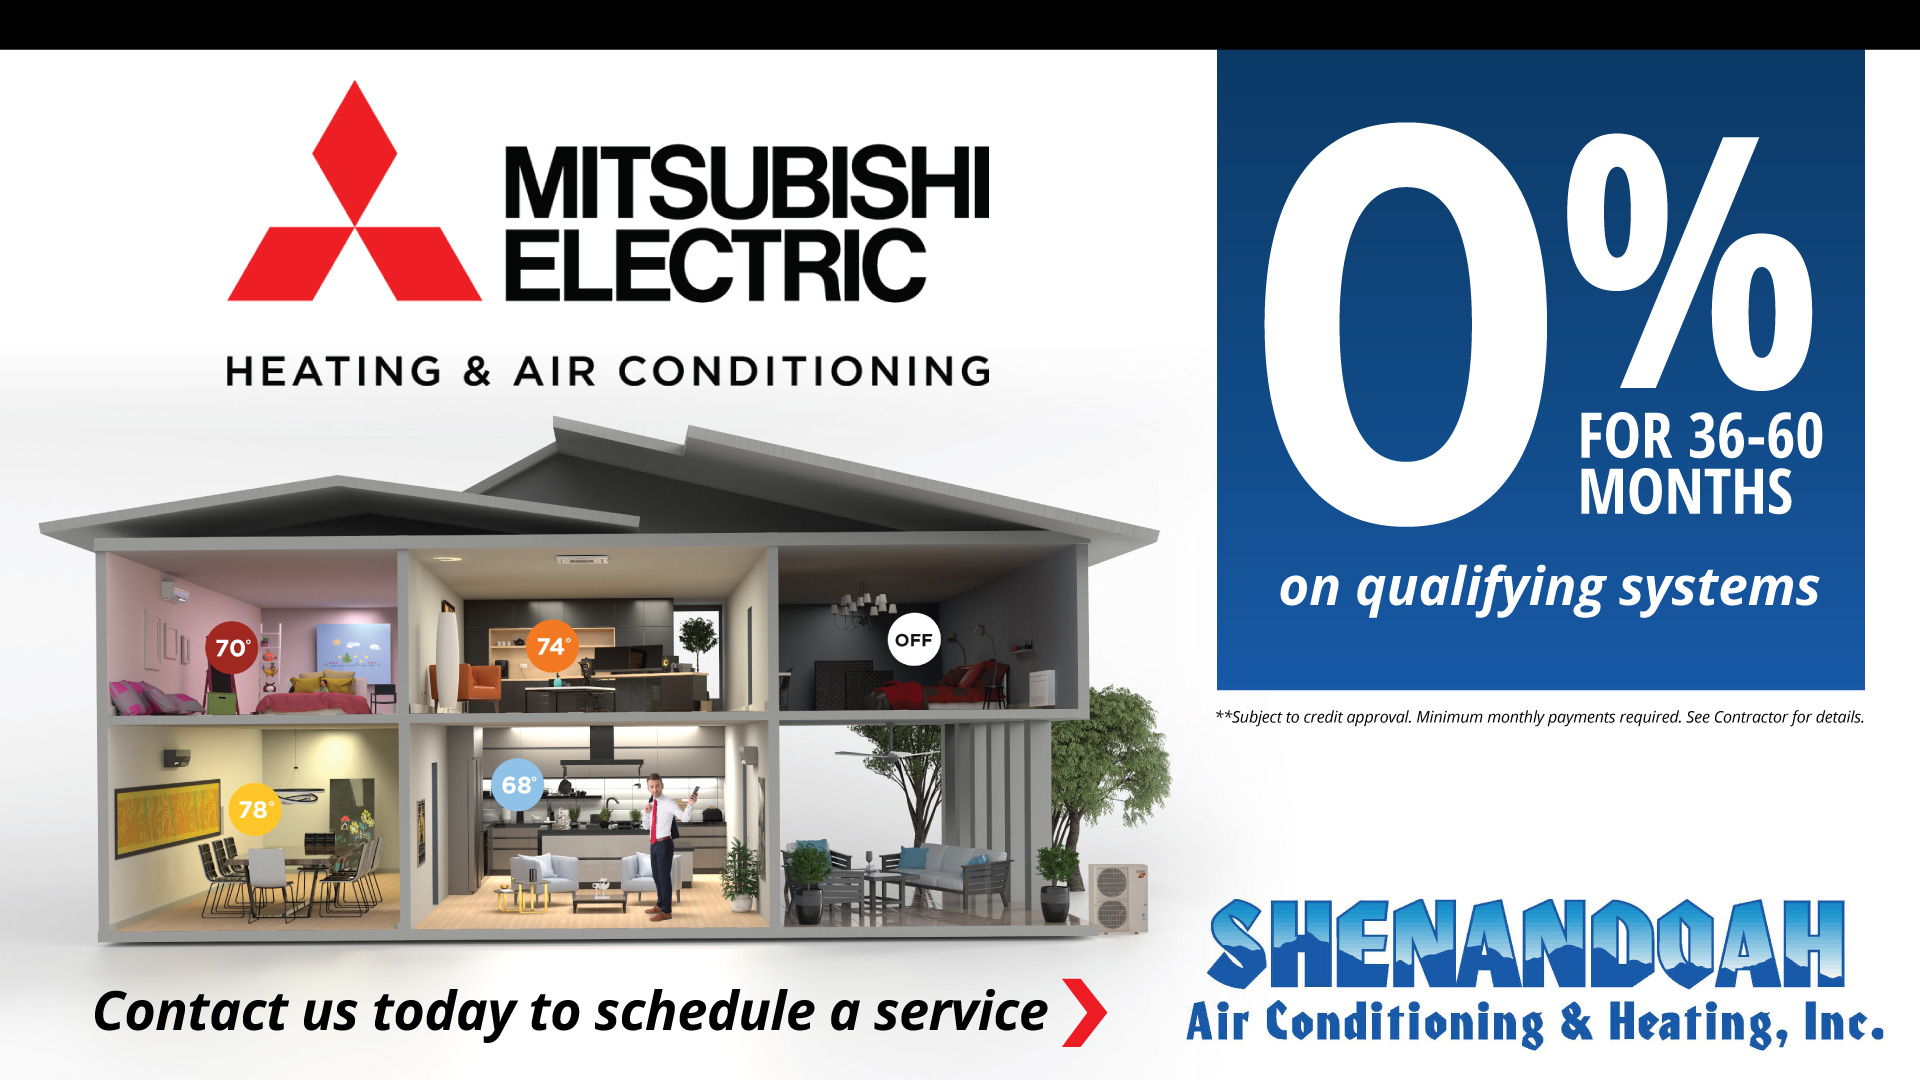 Mitsubishi Special Offers 0% financing for 36 Months